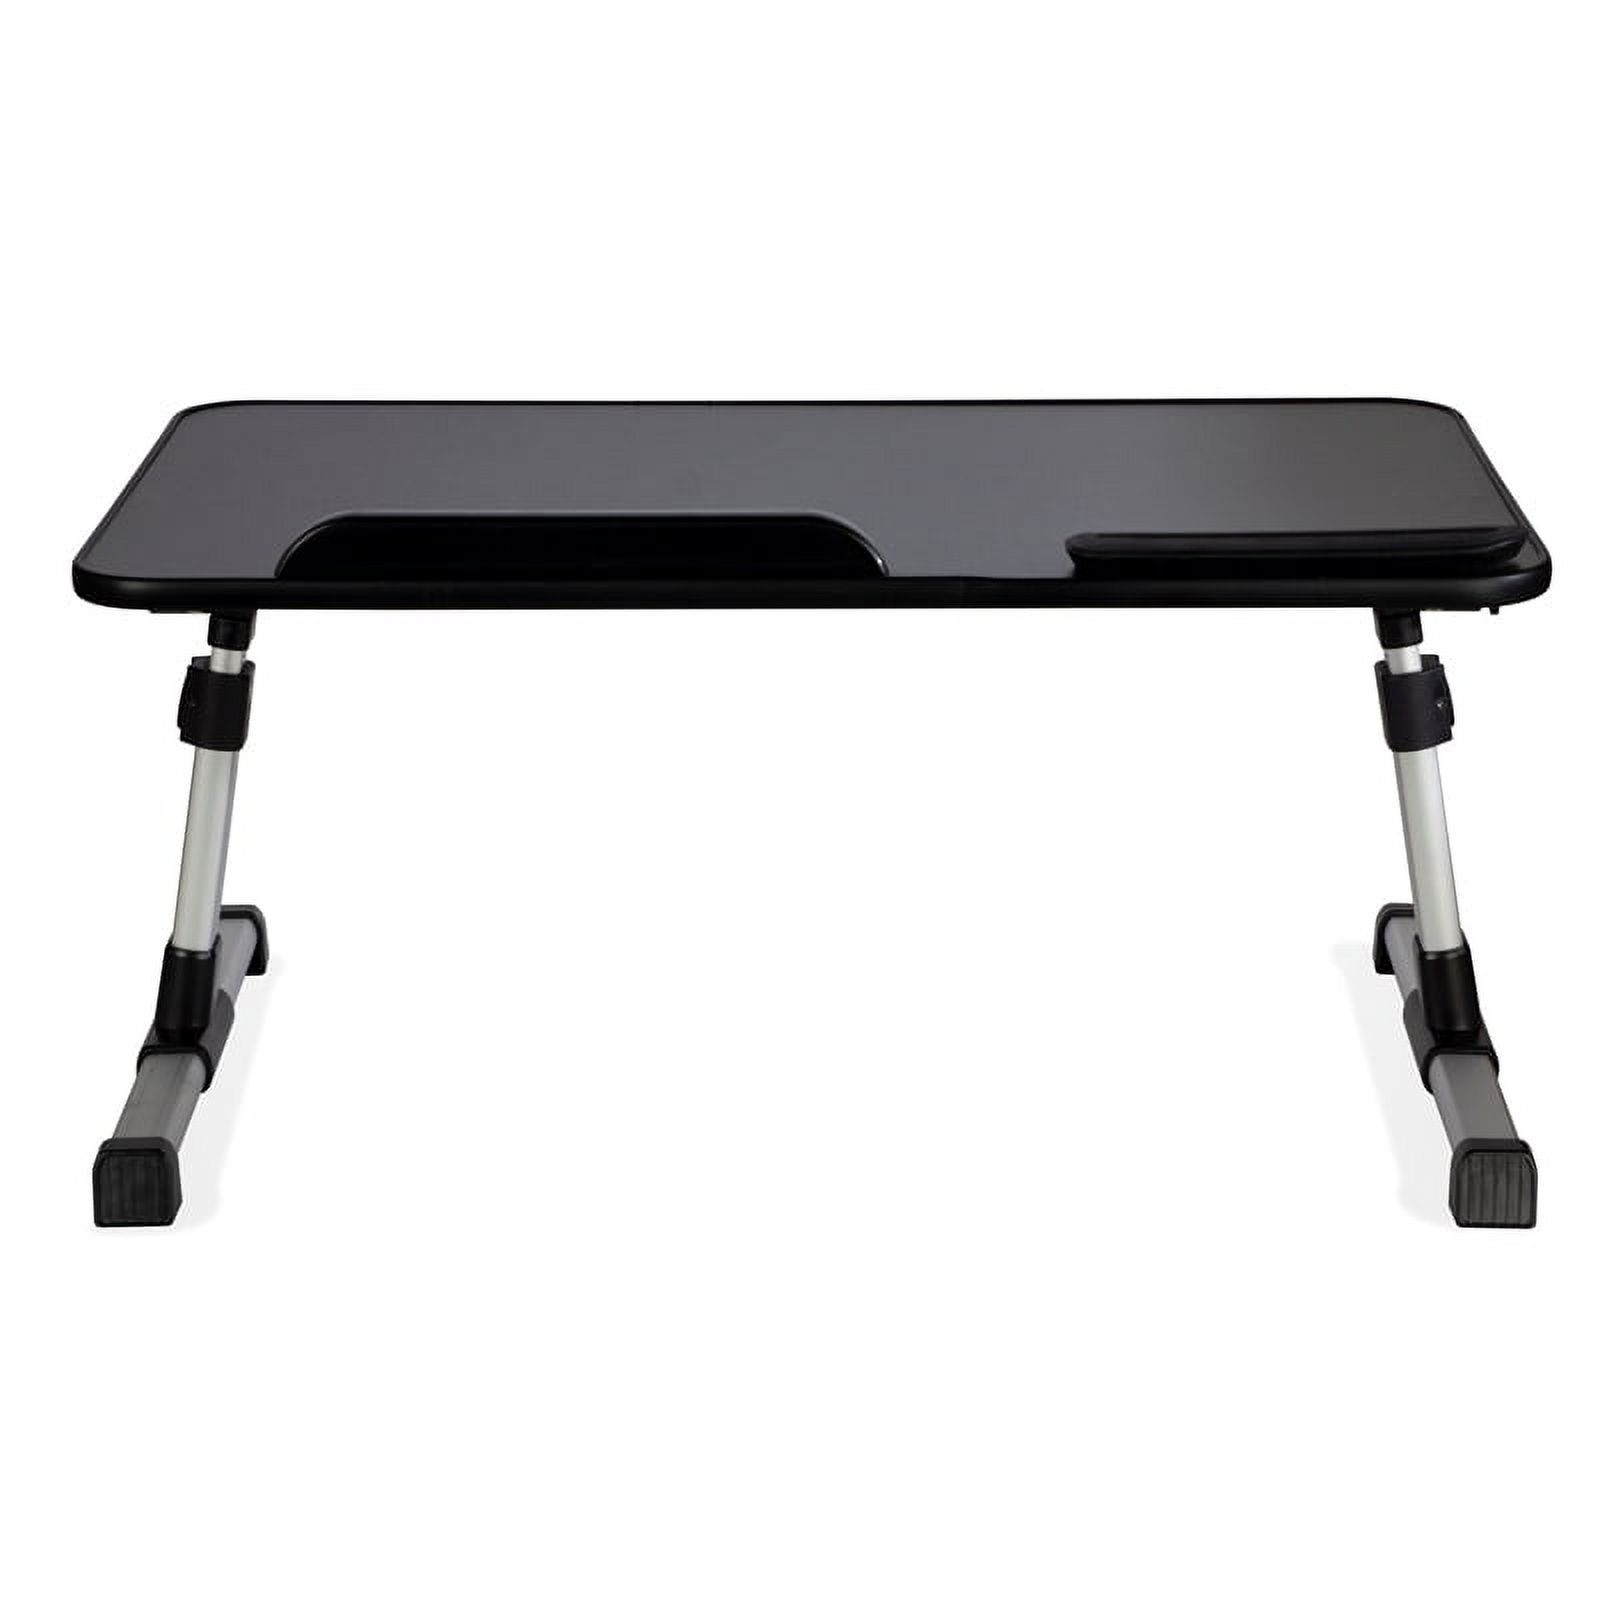 Atlantic Portable Laptop Tray Table with Adjustablt Height and Tilt, Fits Laptops up to 20", Black - image 4 of 8